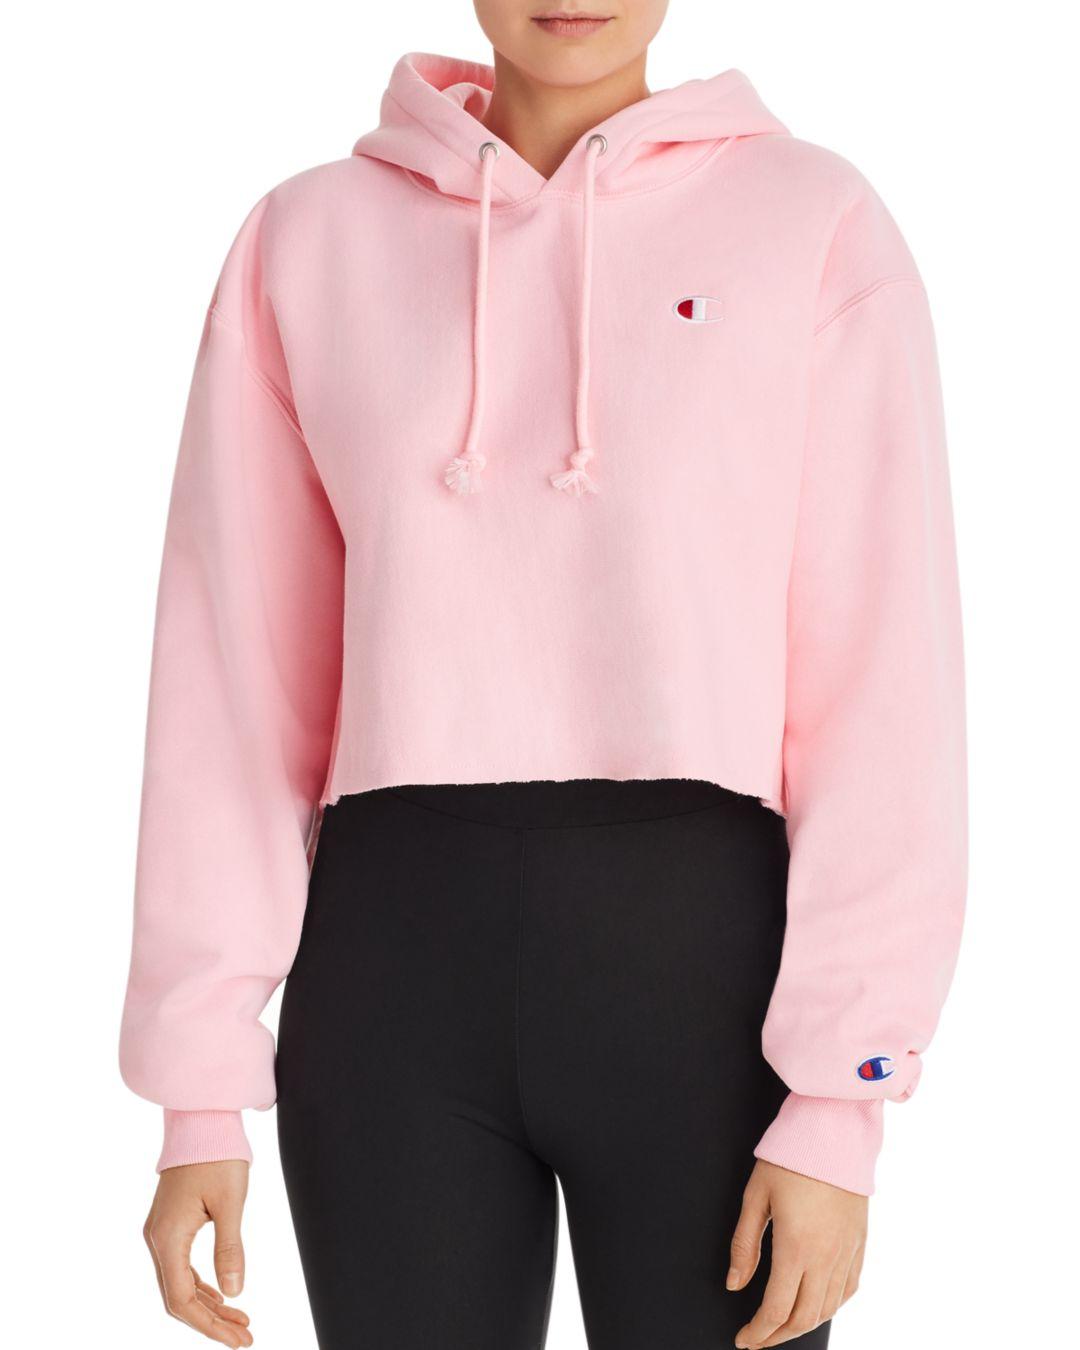 Champion Reverse Weave Cropped Hooded Sweatshirt in Pink Candy (Pink) - Lyst